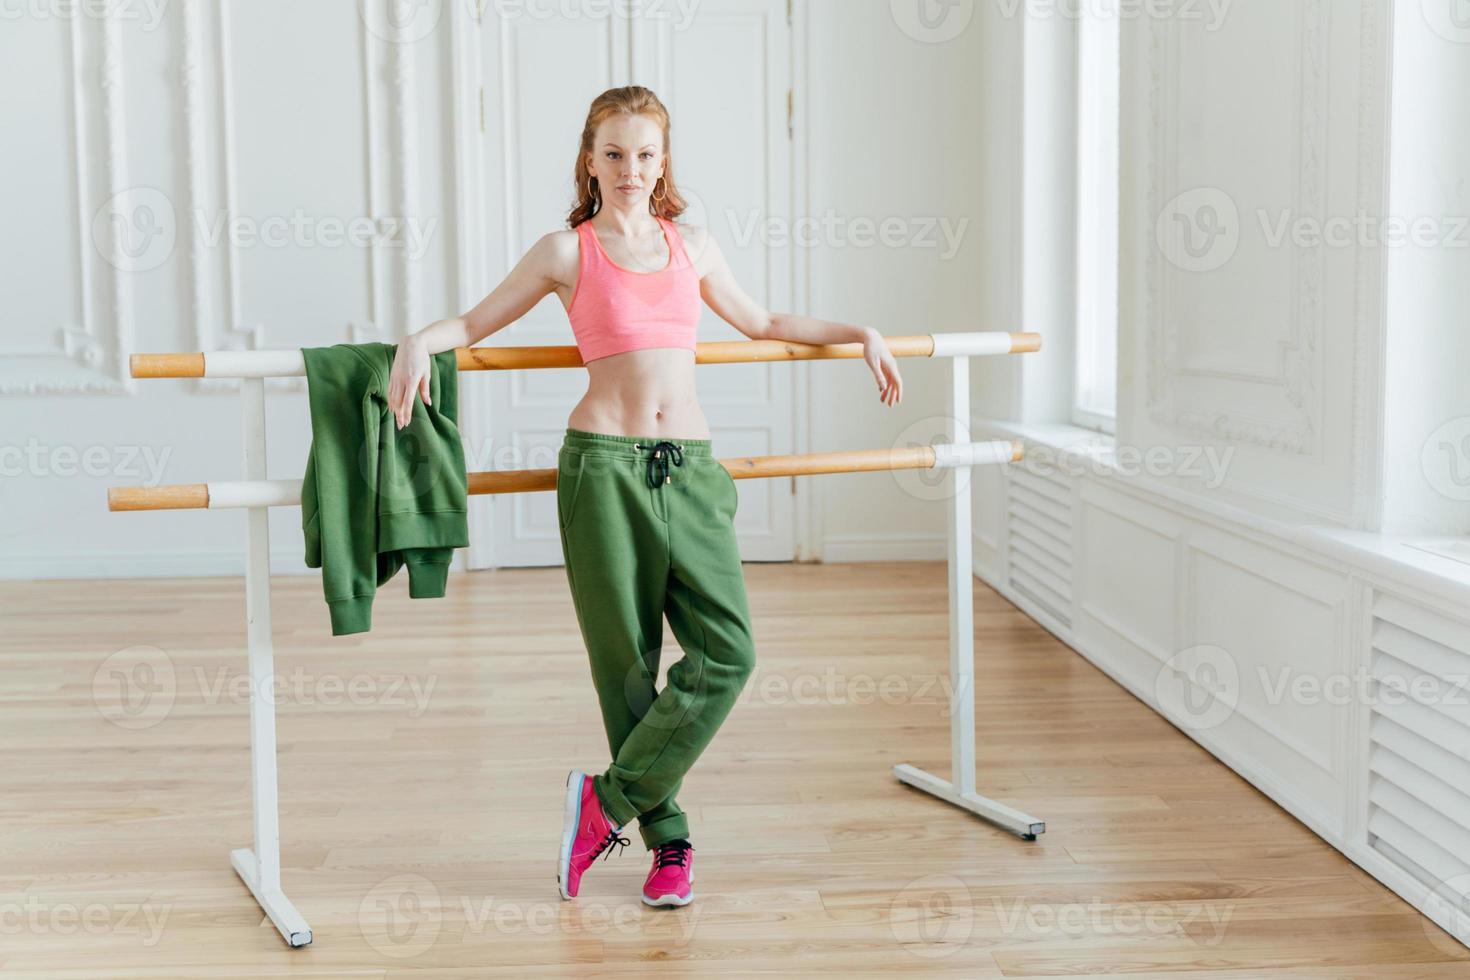 Slim beautiful female ballet dancer leans at ballet barre, wears pink top, sport trousers and sneakers, shows fit figure, stretches before dancing, poses in studio or classroom, has rehearsal photo